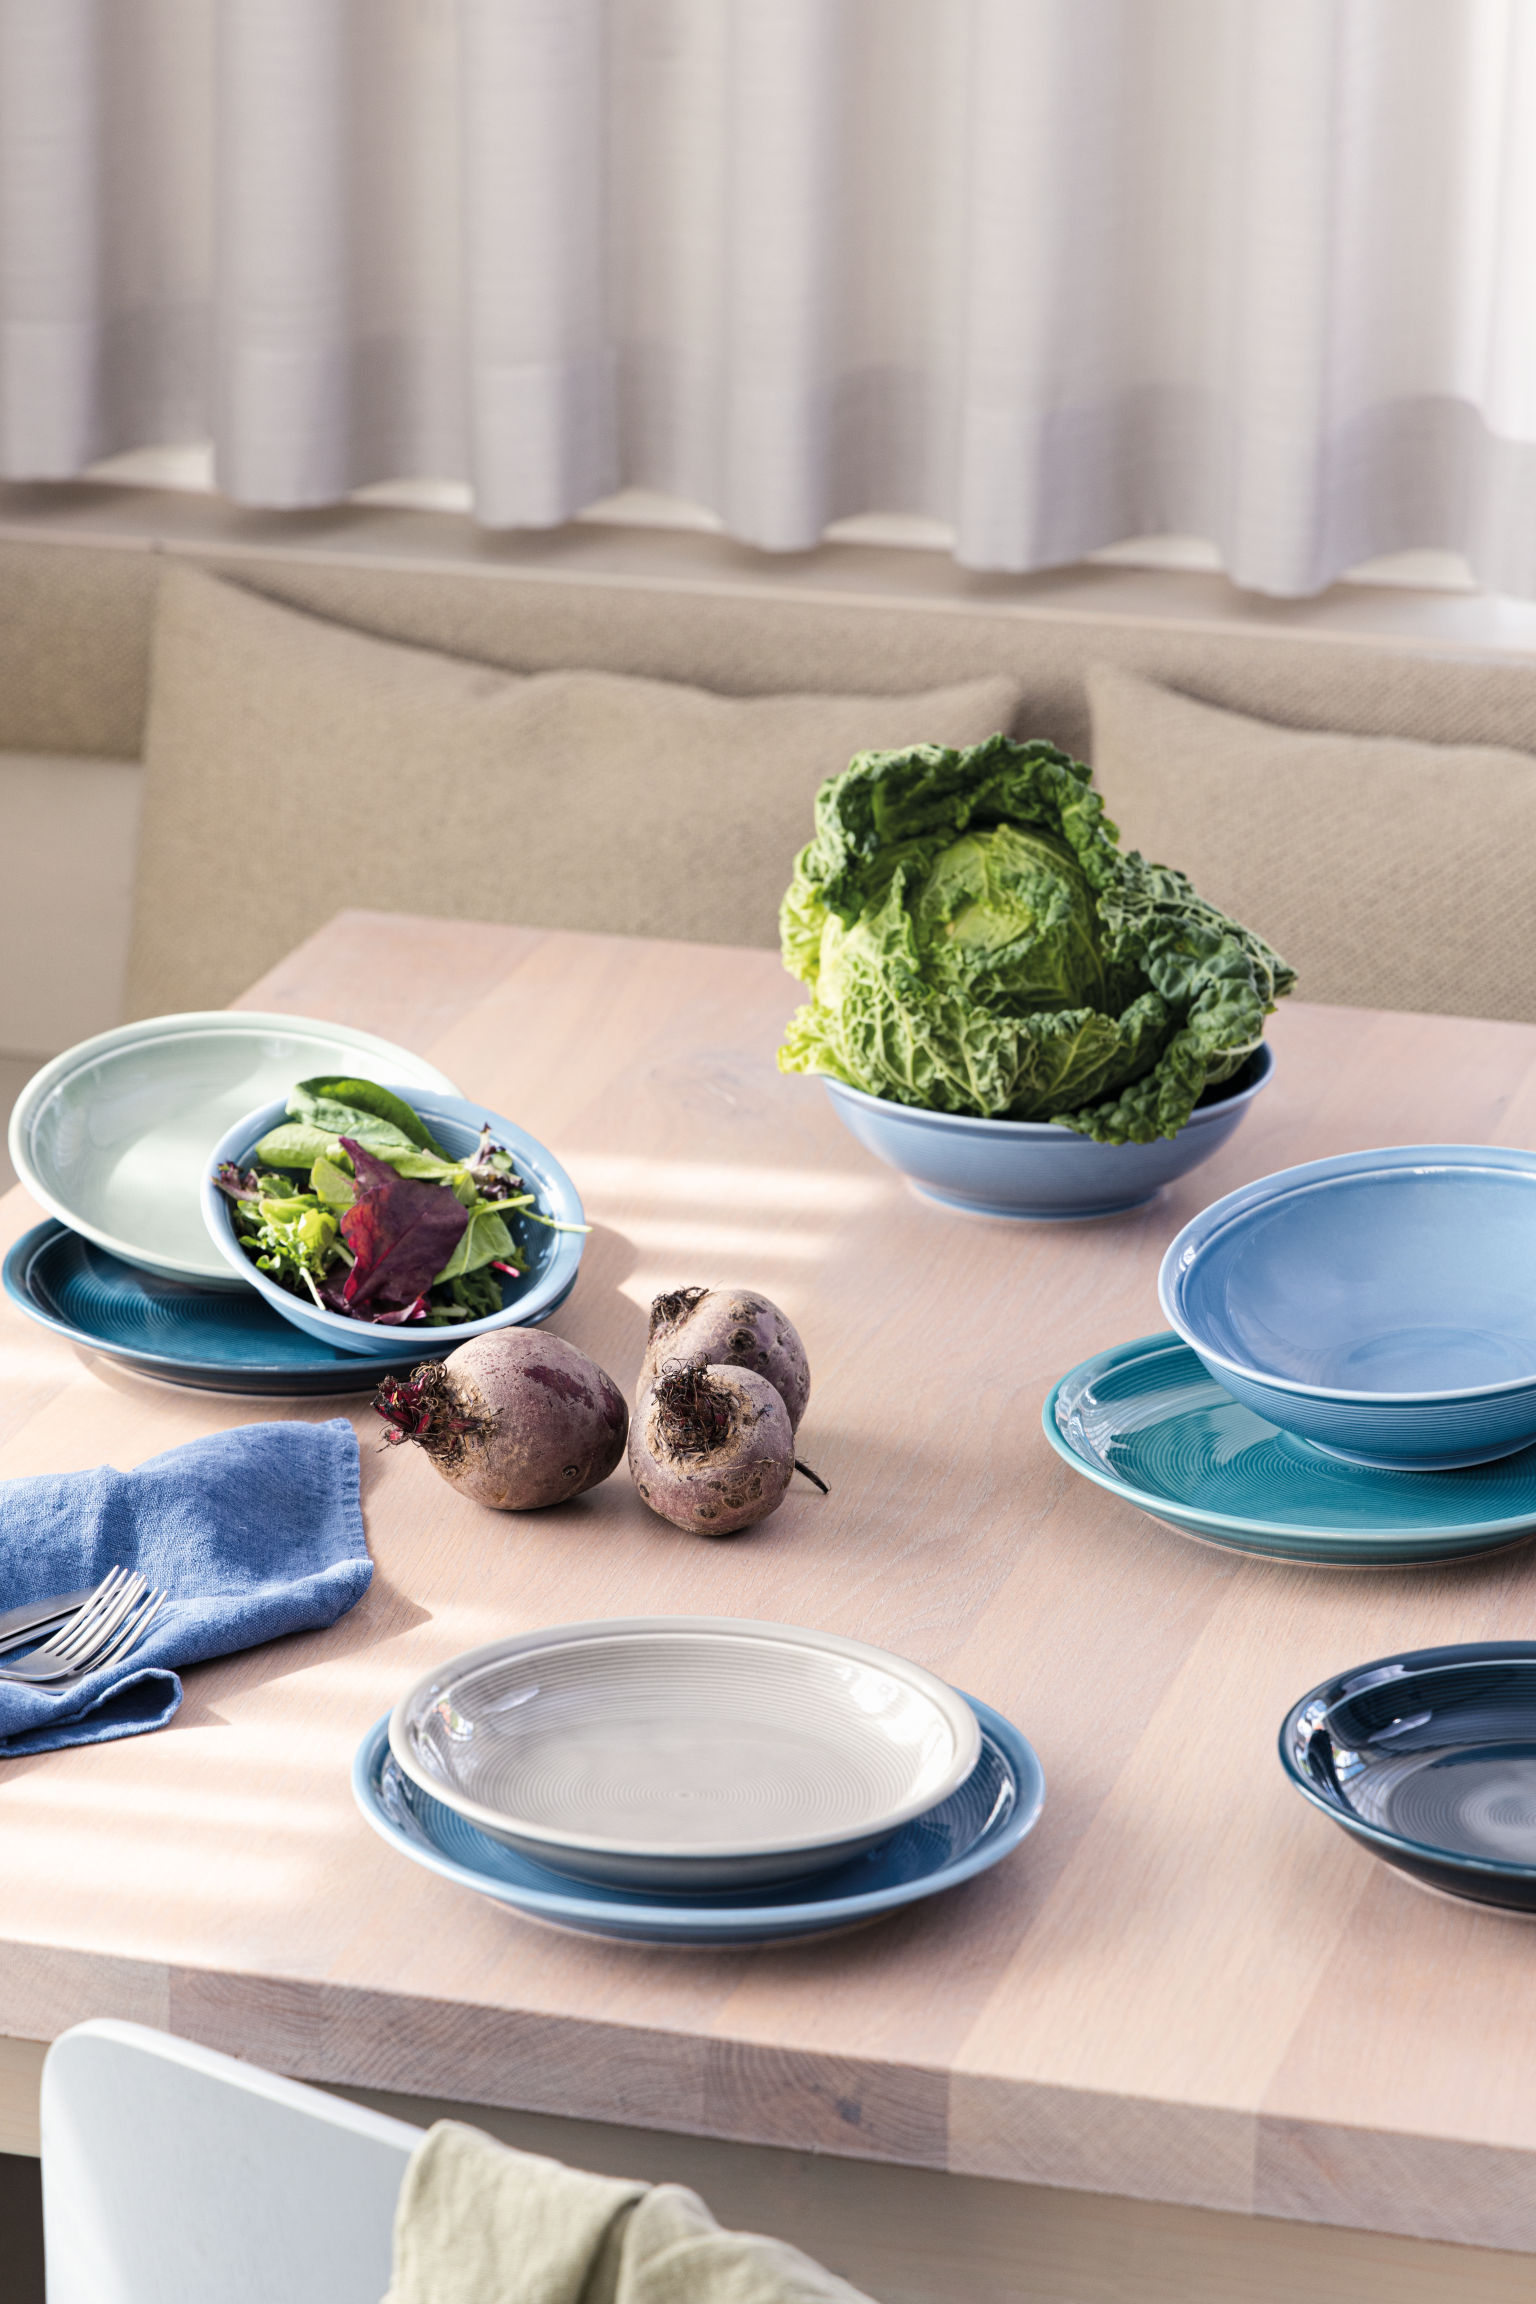 Thomas Trend set table with different plates and beetroots and cabbage as decoration